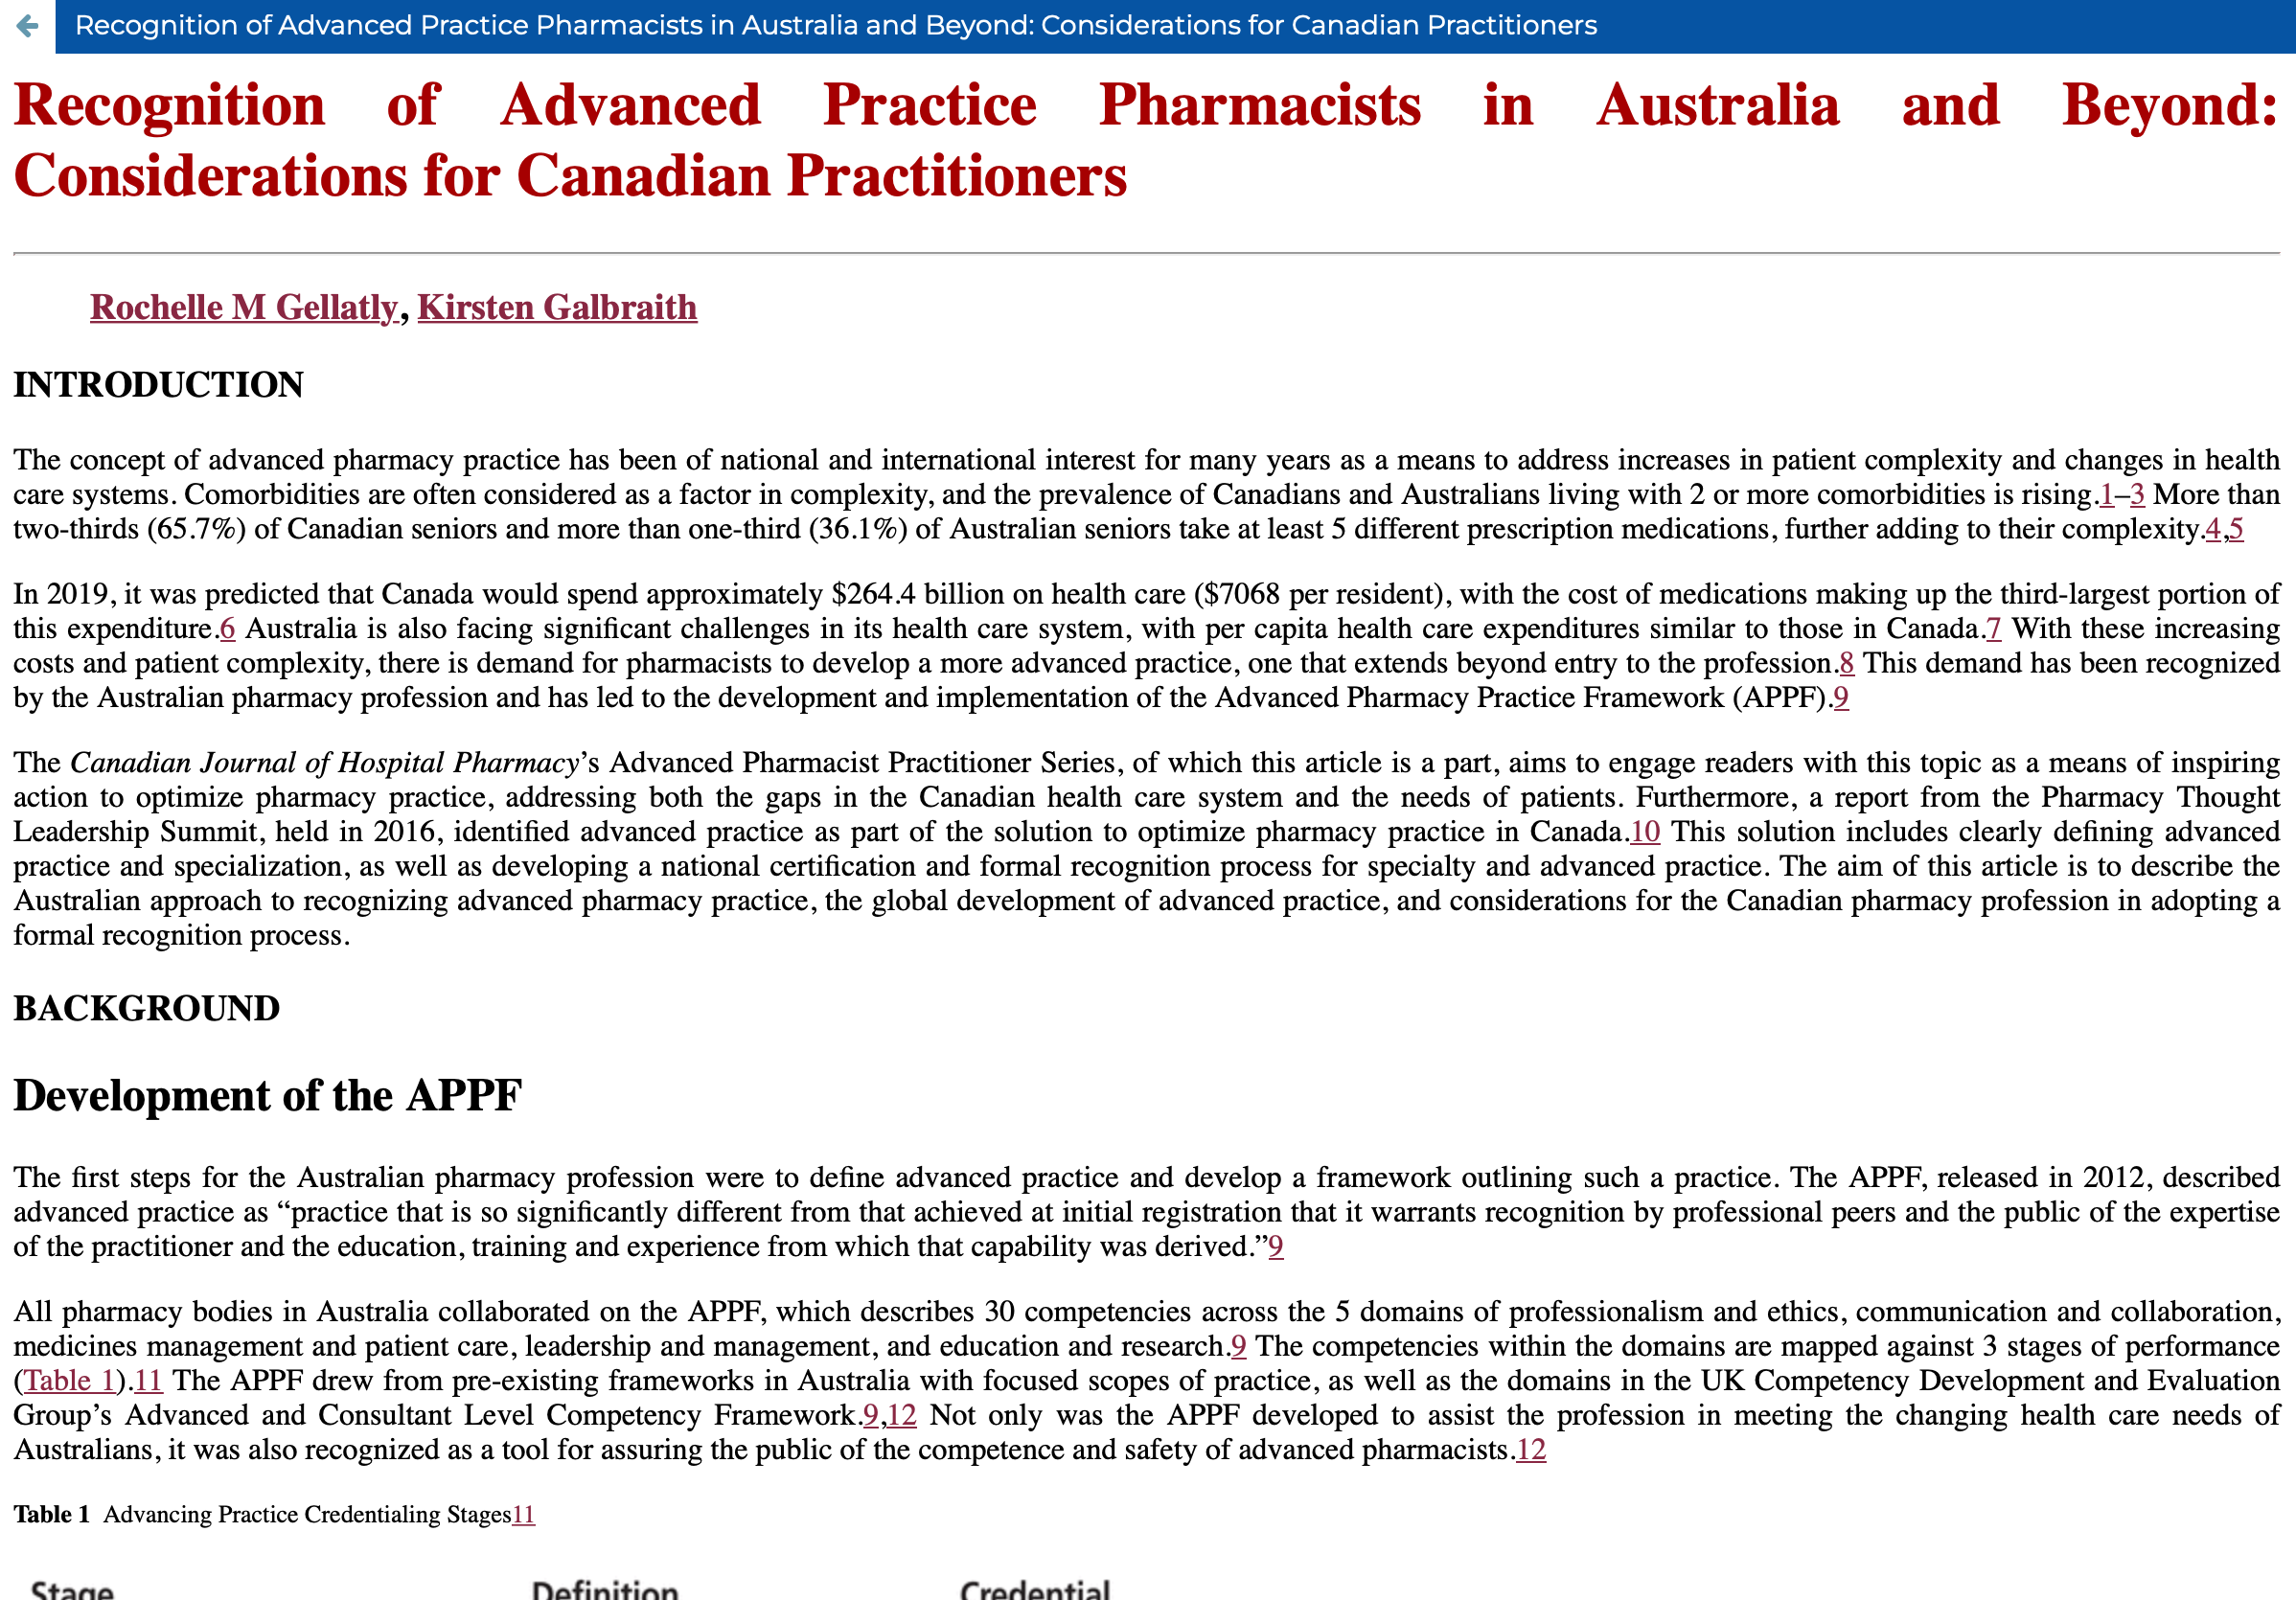 Recognition of Advanced Practice Pharmacists in Australia and Beyond: Considerations for Canadian Practitioners (2020) Thumbnail